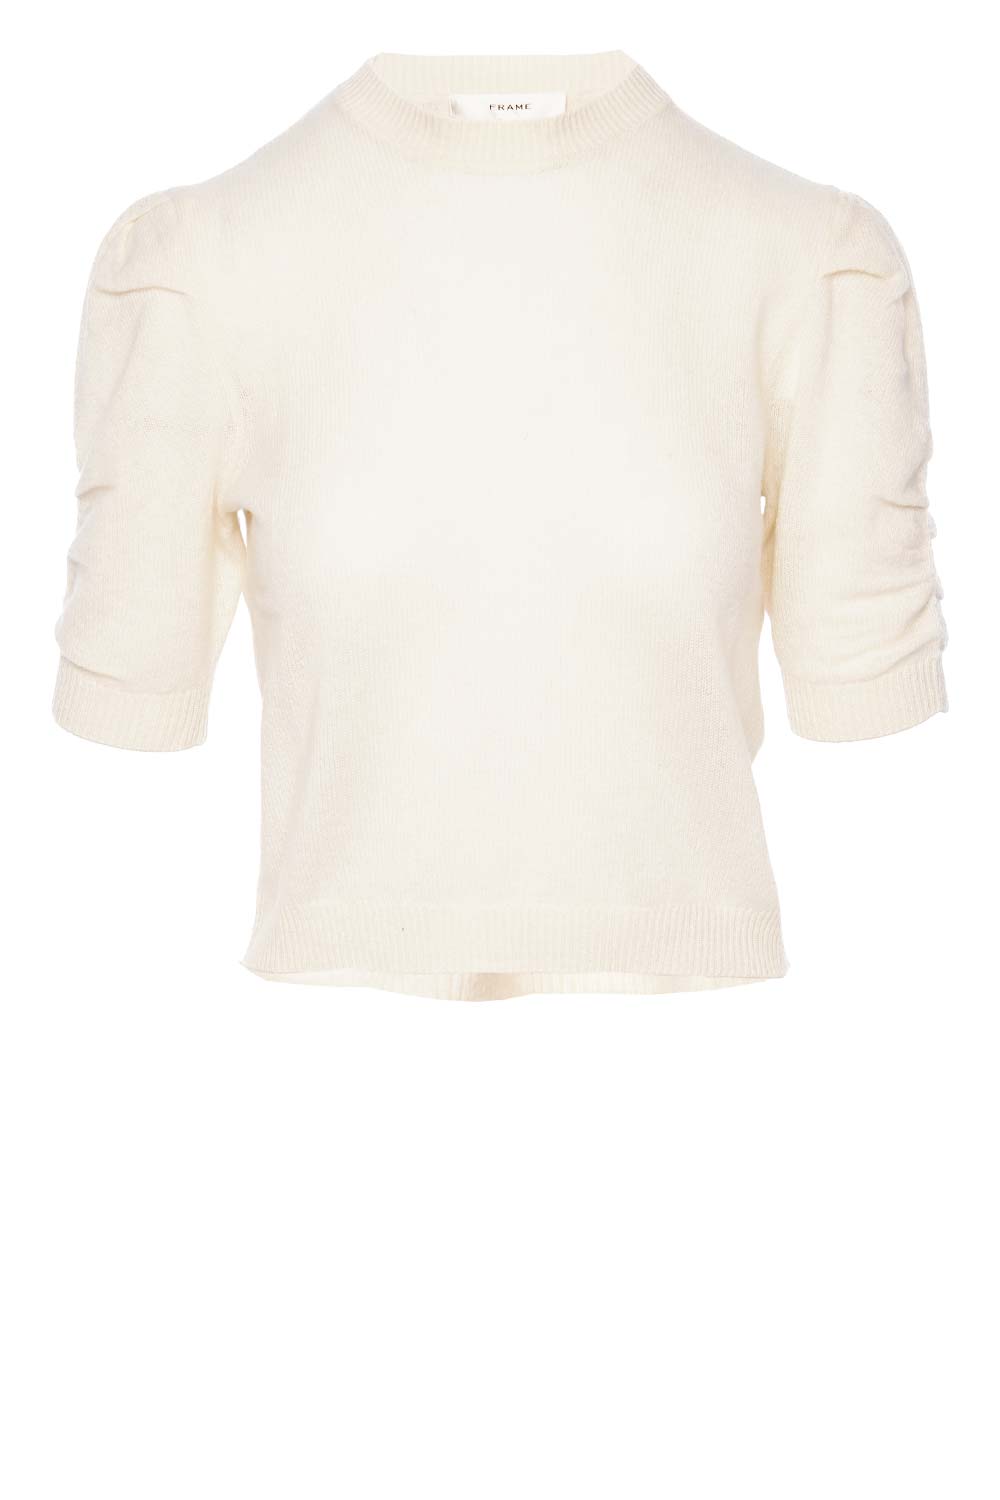 FRAME Cream Ruched Sleeve Cashmere Sweater